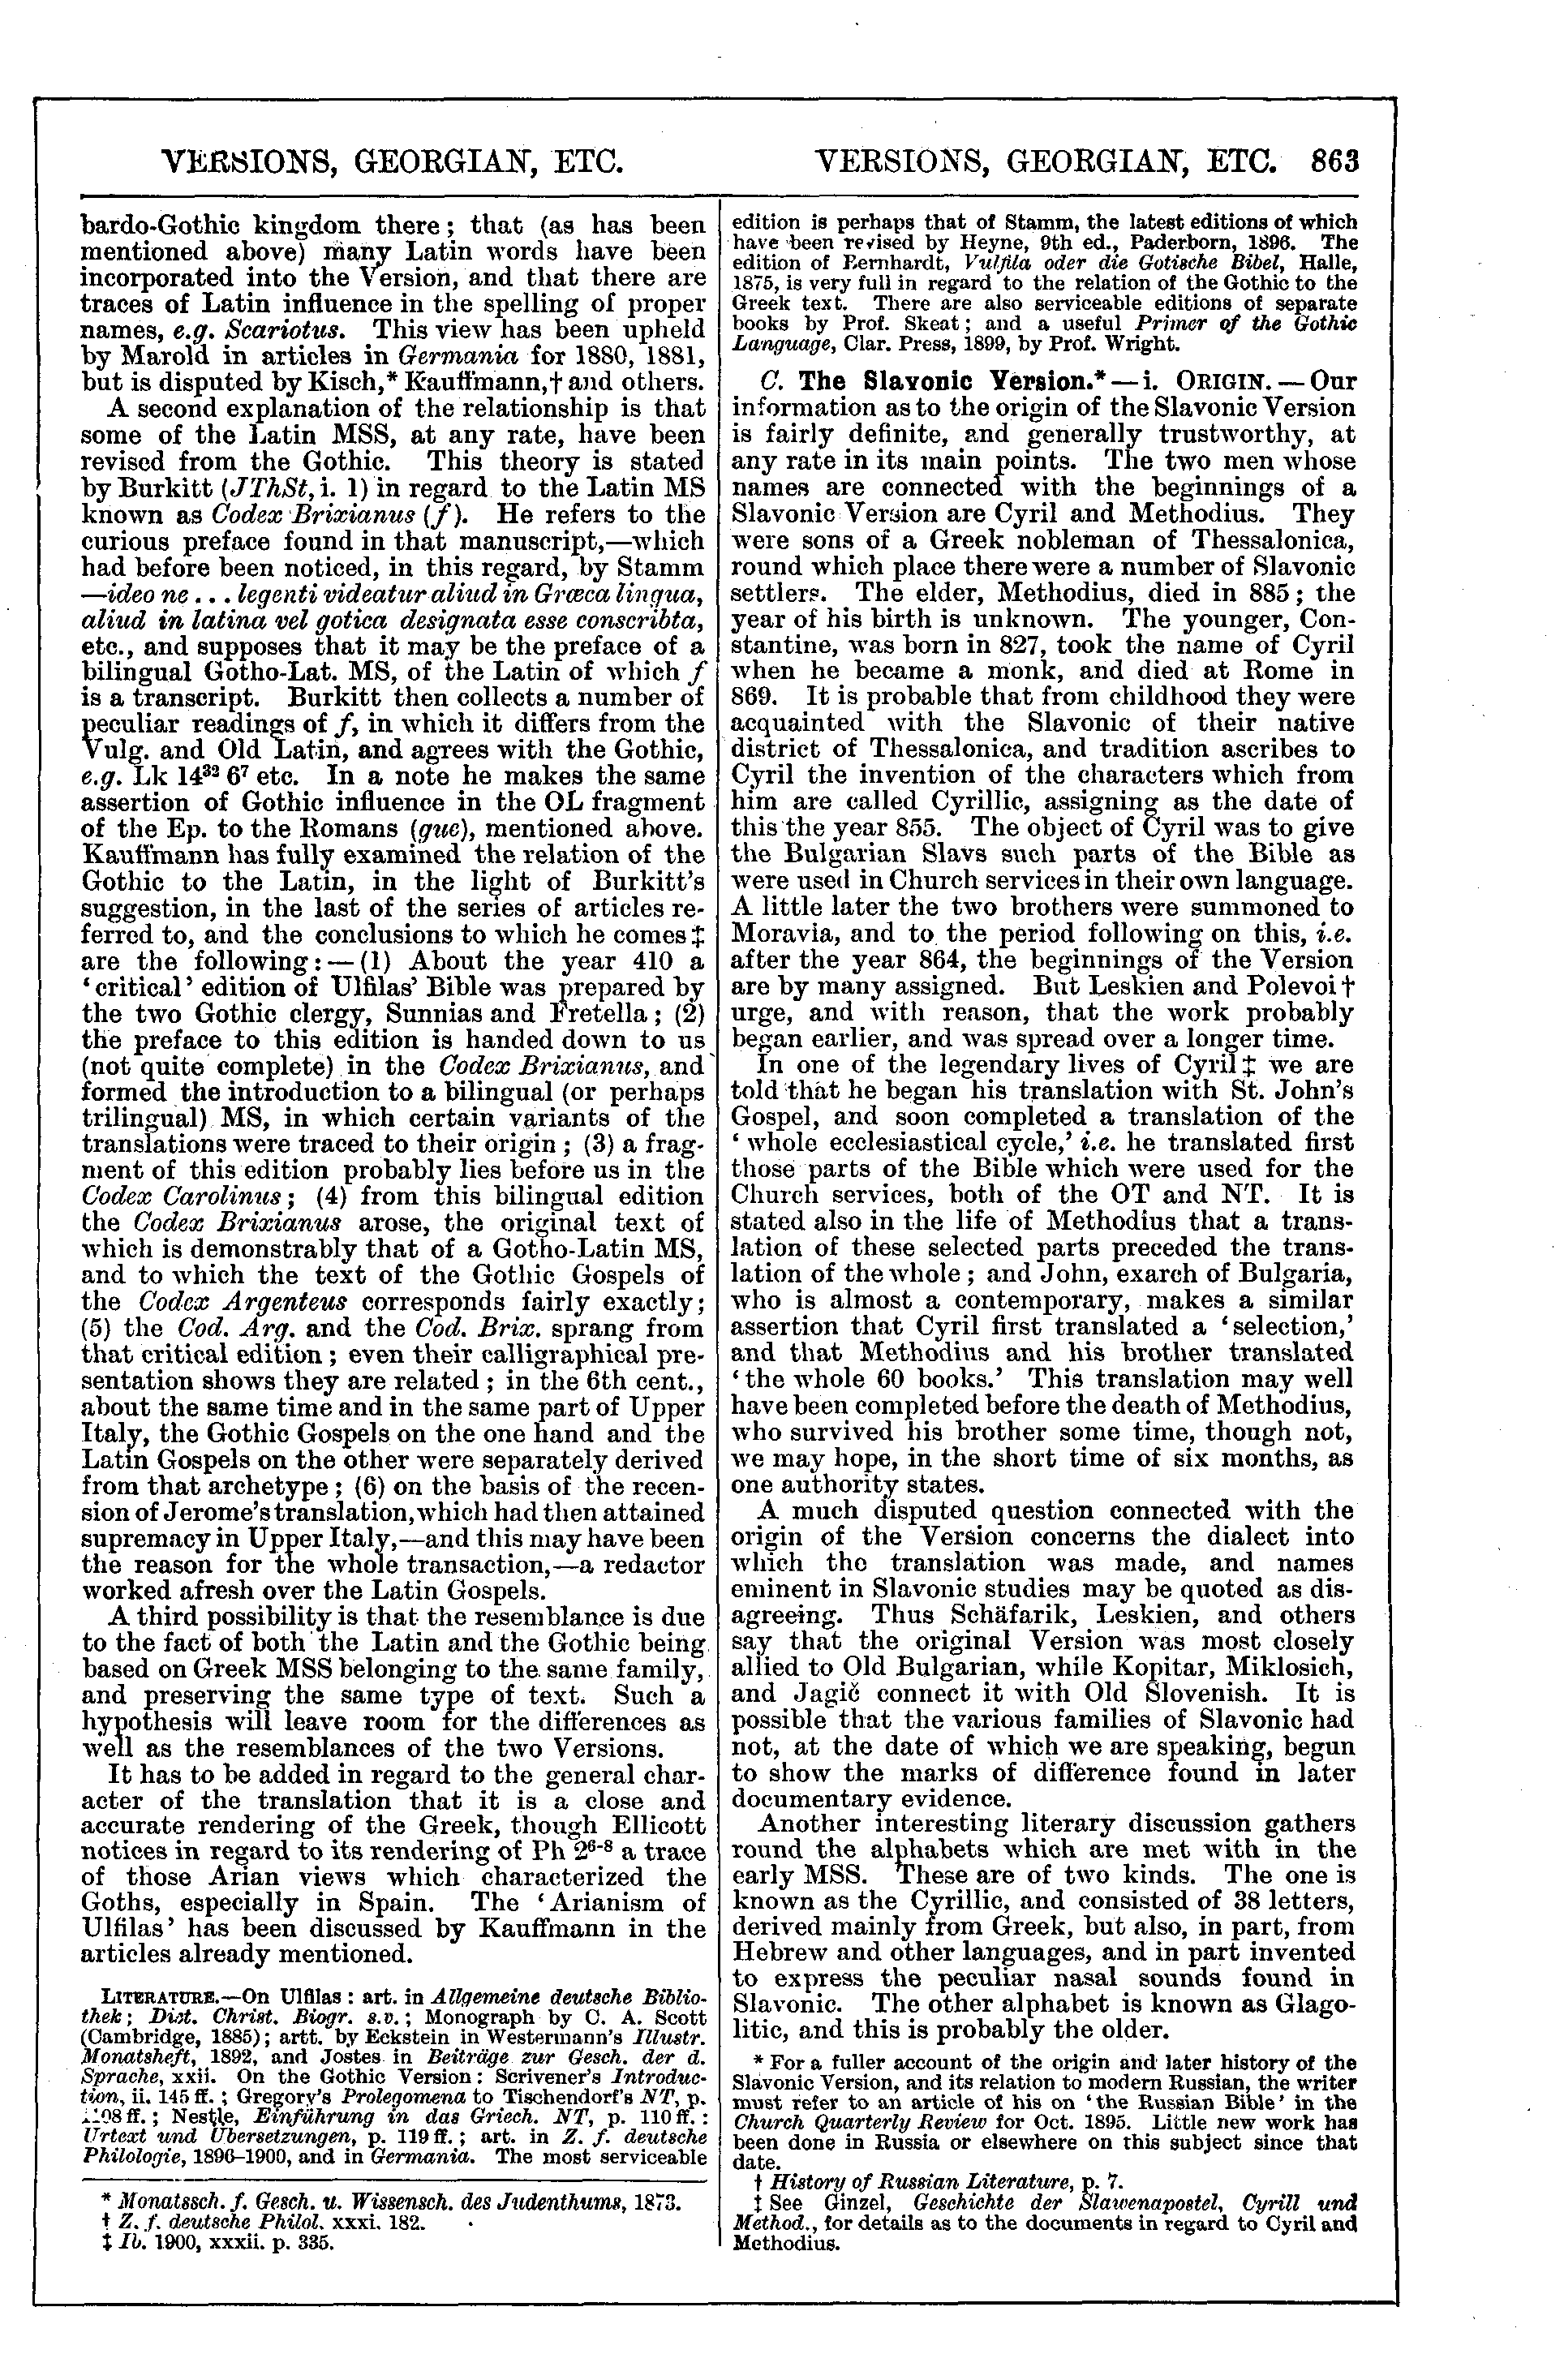 Image of page 863